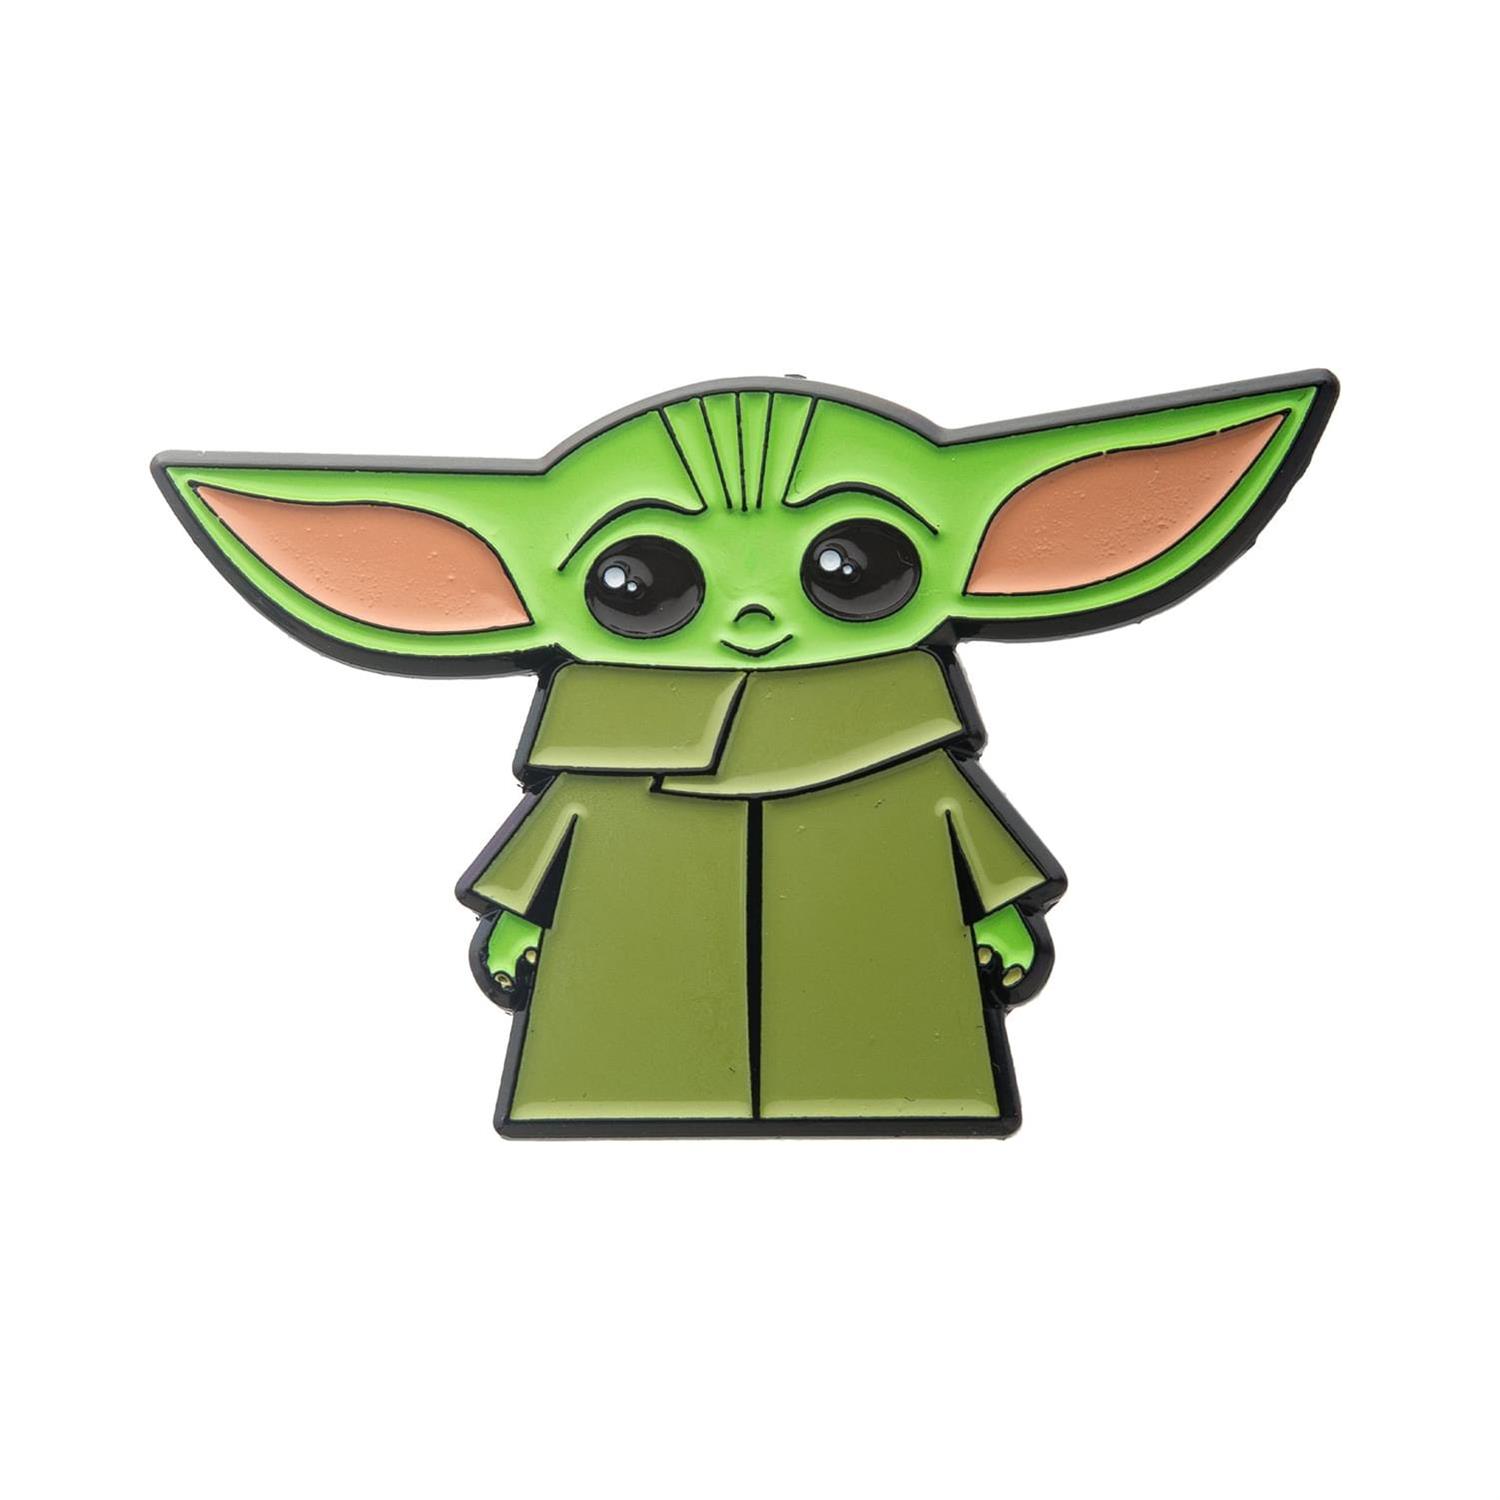 Get An Exclusive Baby Yoda Pin When You Spend 30 On Star Wars Products At Toynk On May The 4th Laughingplace Com